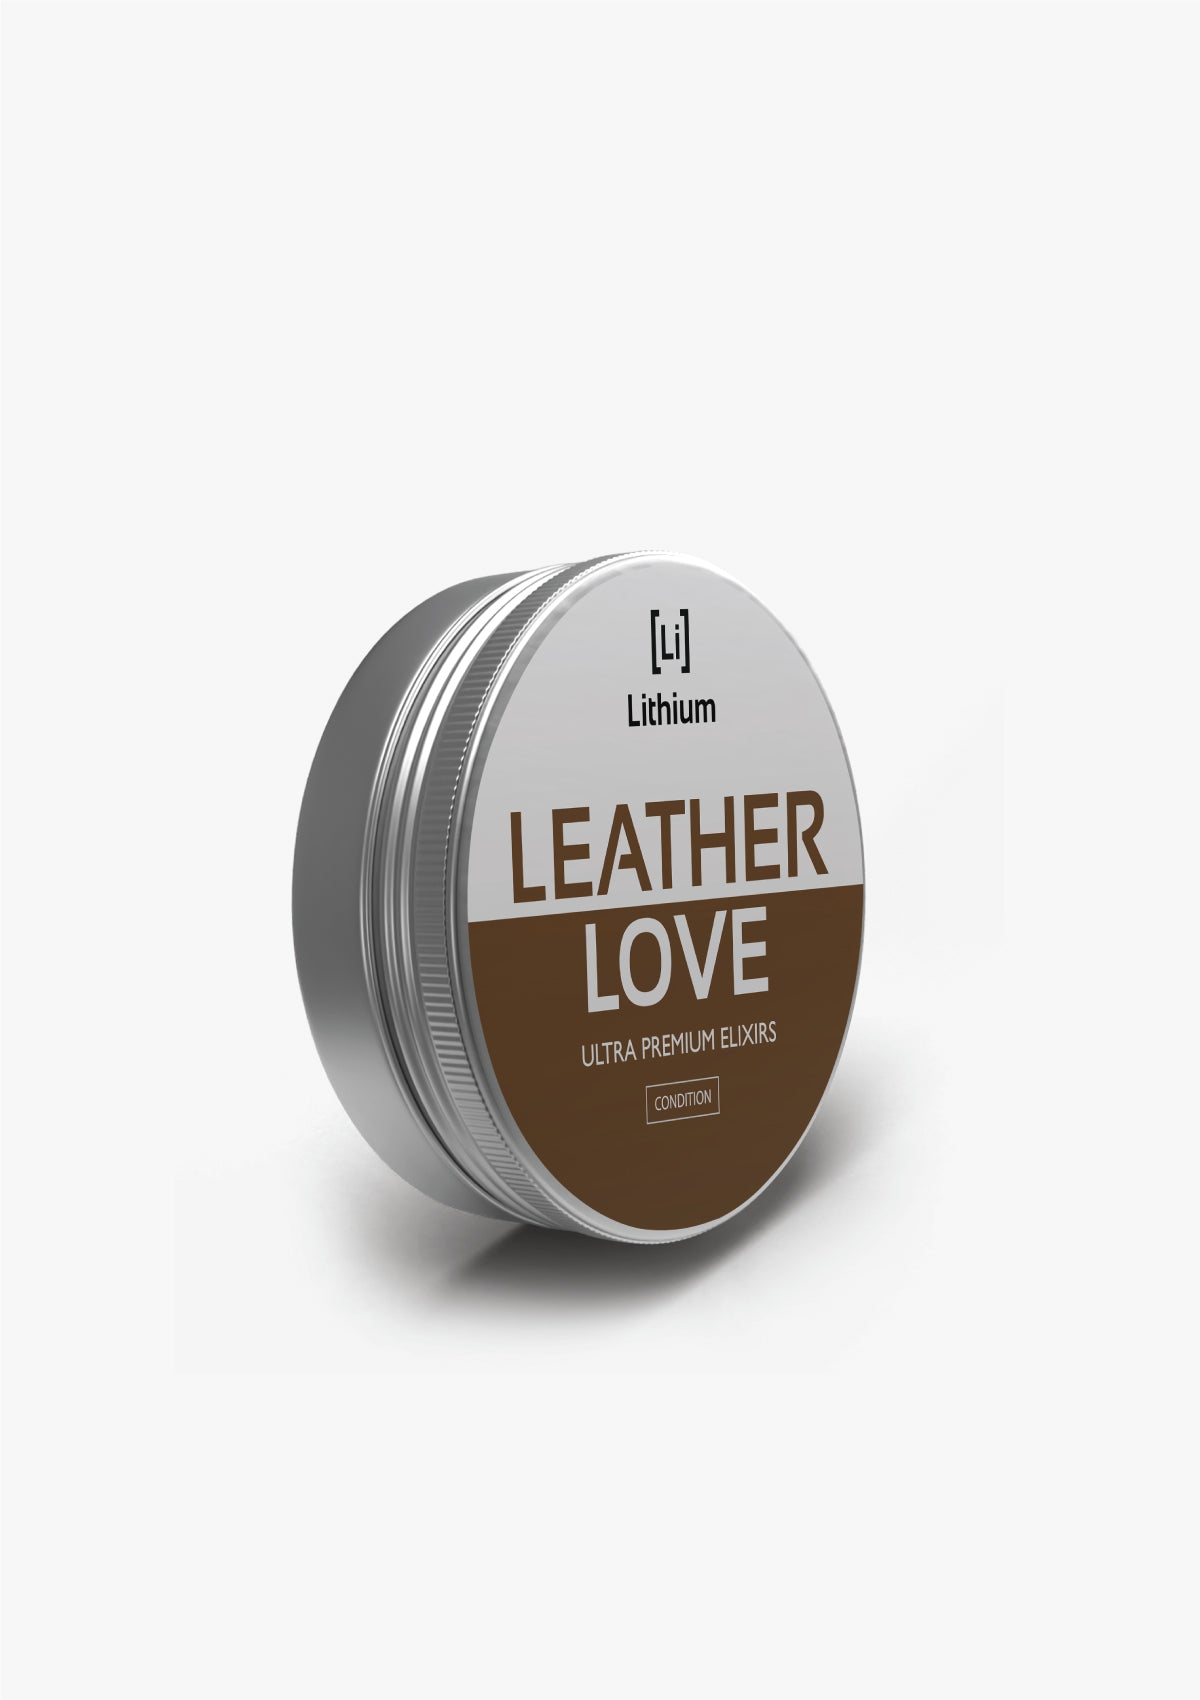 A can of 'Leather Love' leather conditioner with a brown and white label